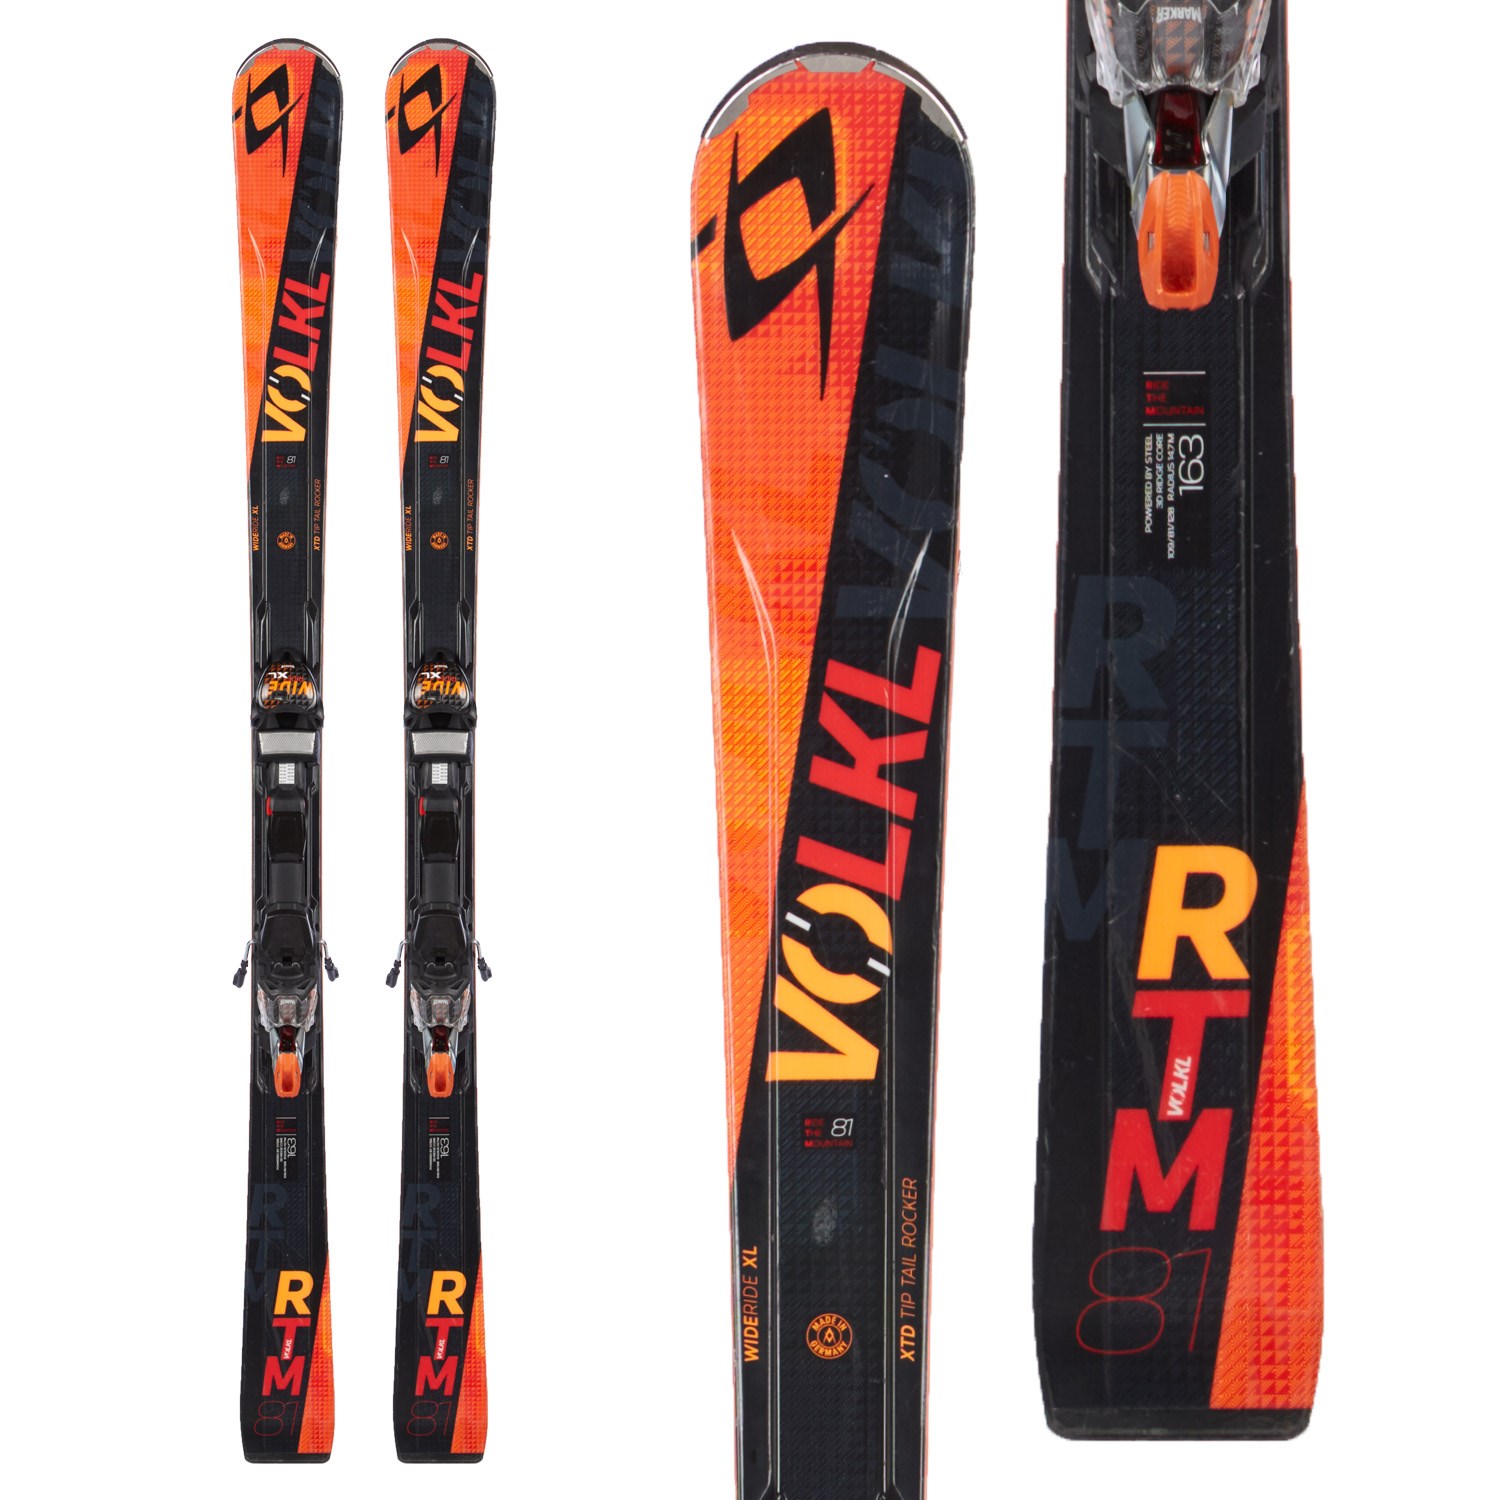 Used Ski Gear with regard to Awesome in addition to Attractive how to buy used ski equipment intended for  Property